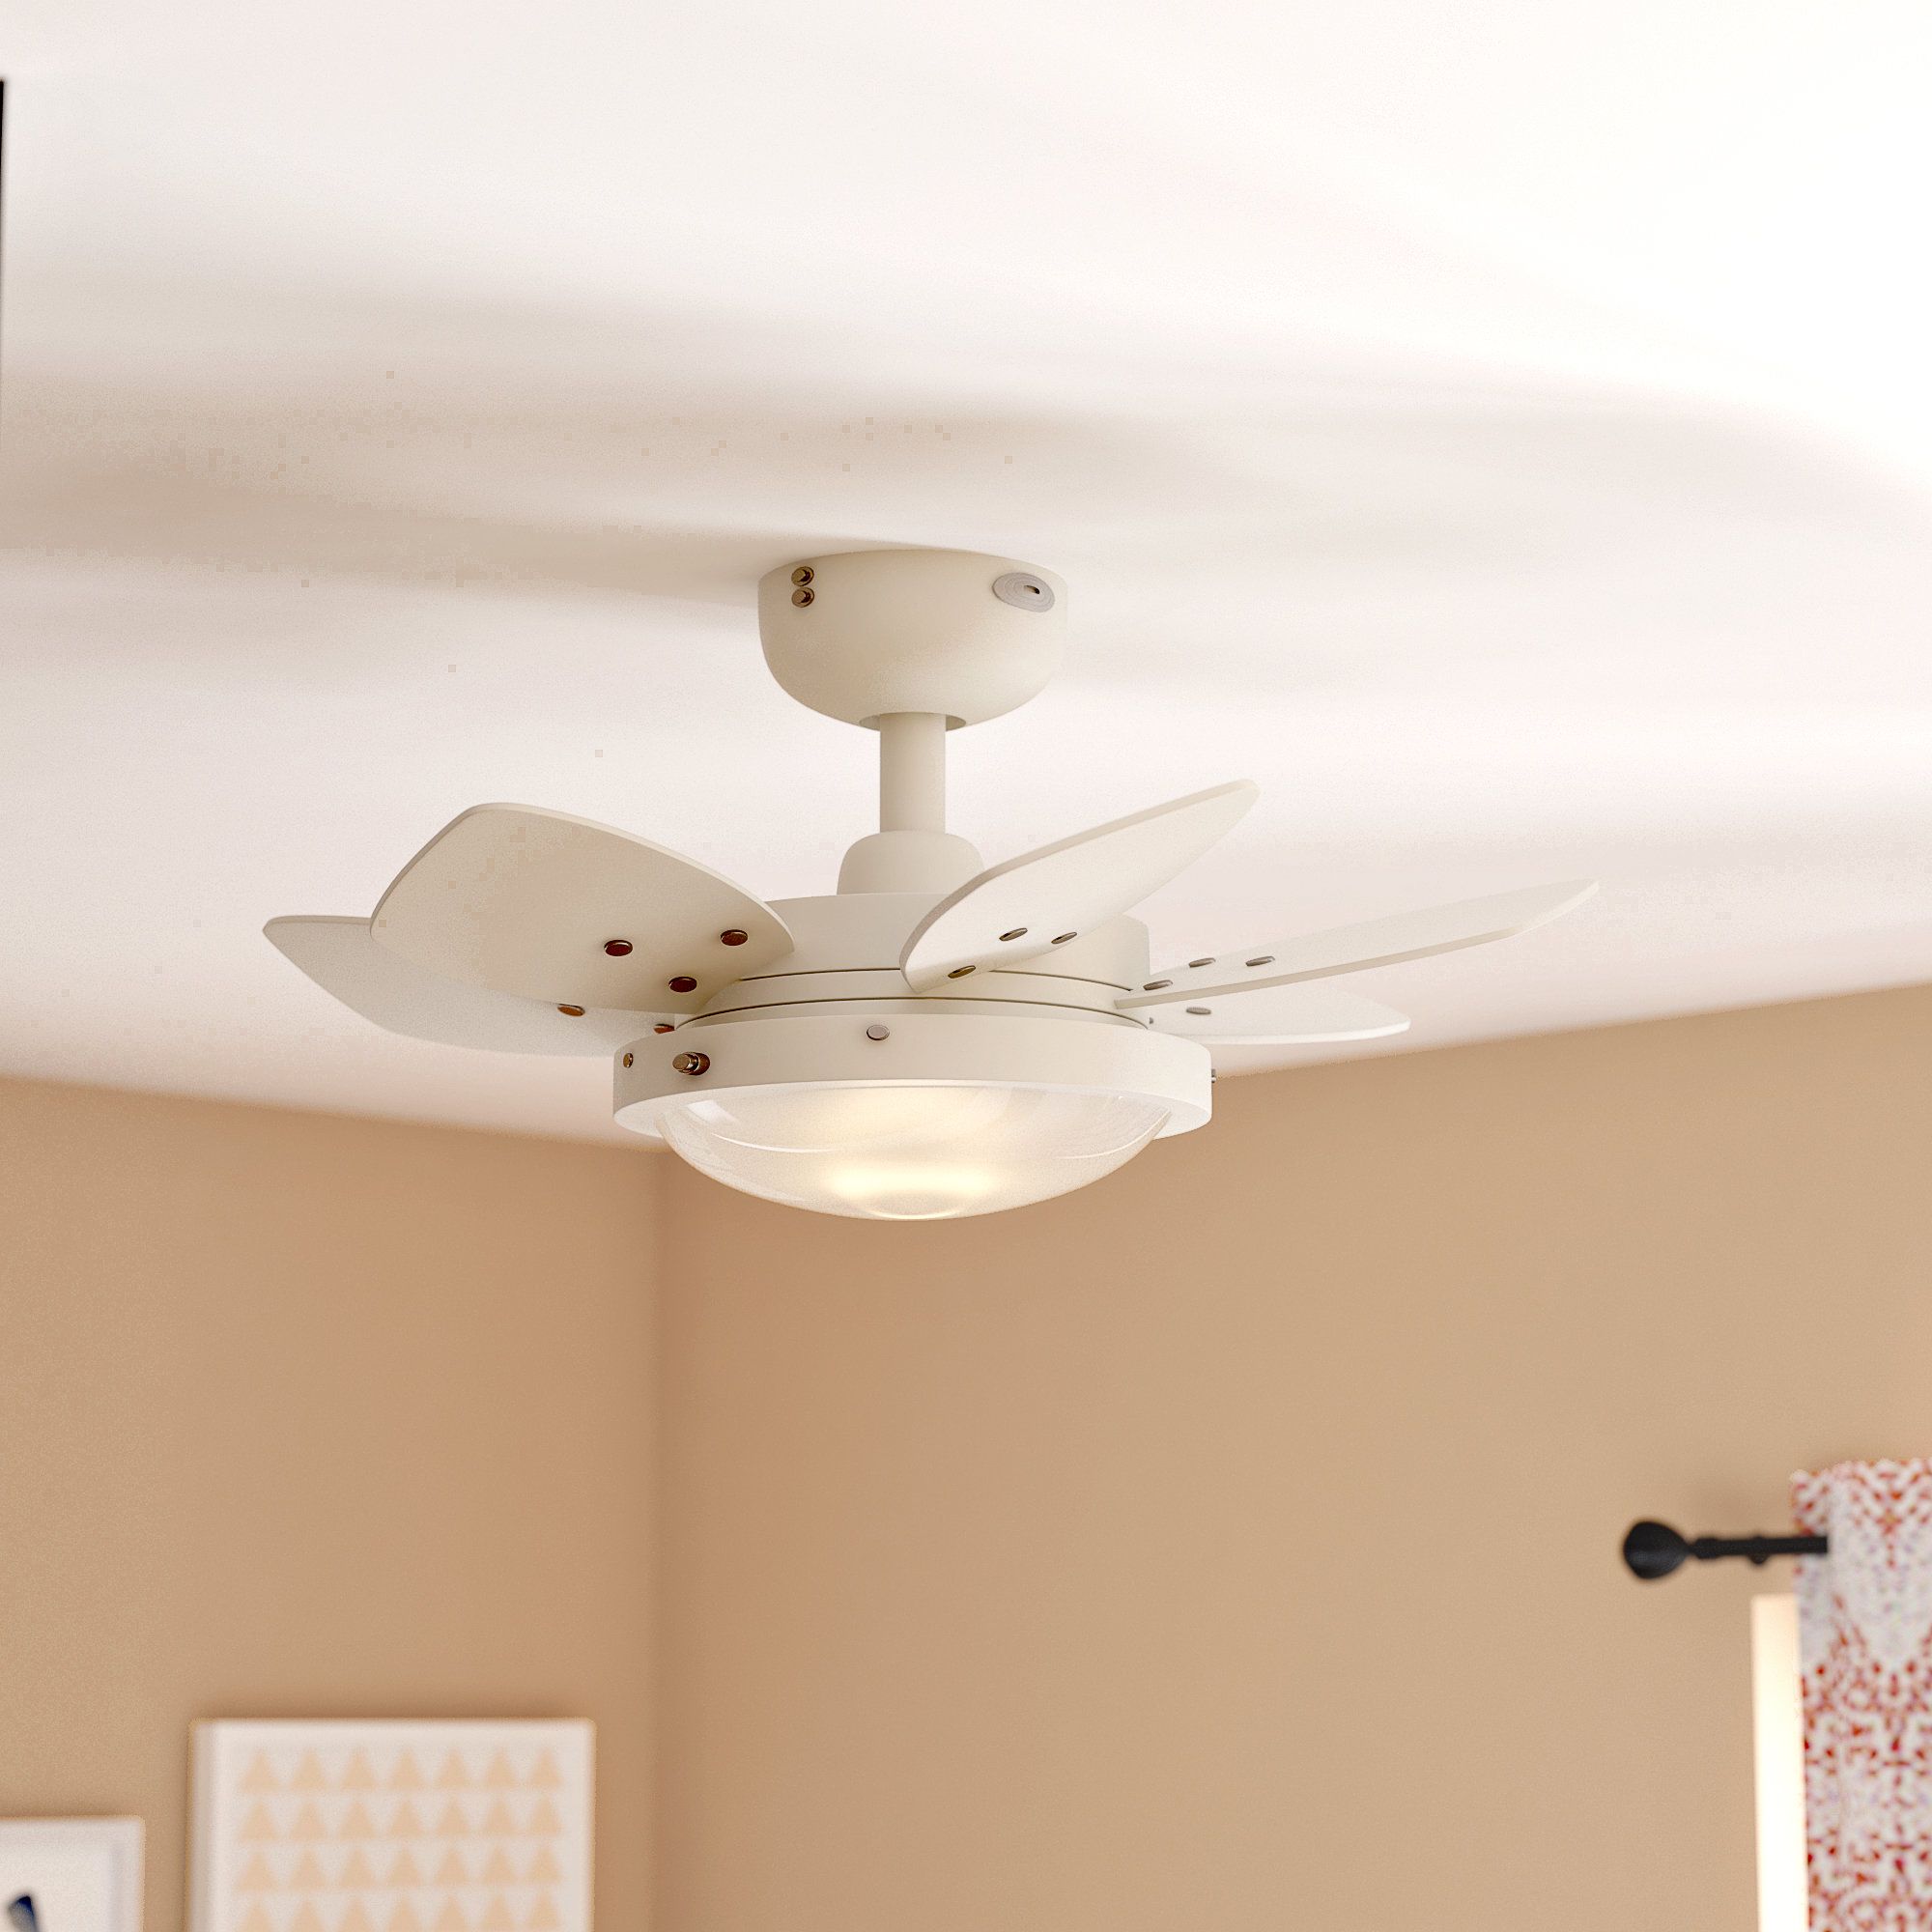 24" Chenut 6 Blade Ceiling Fan Light Kit Included In Well Liked Jules 6 Blade Ceiling Fans (Photo 1 of 20)